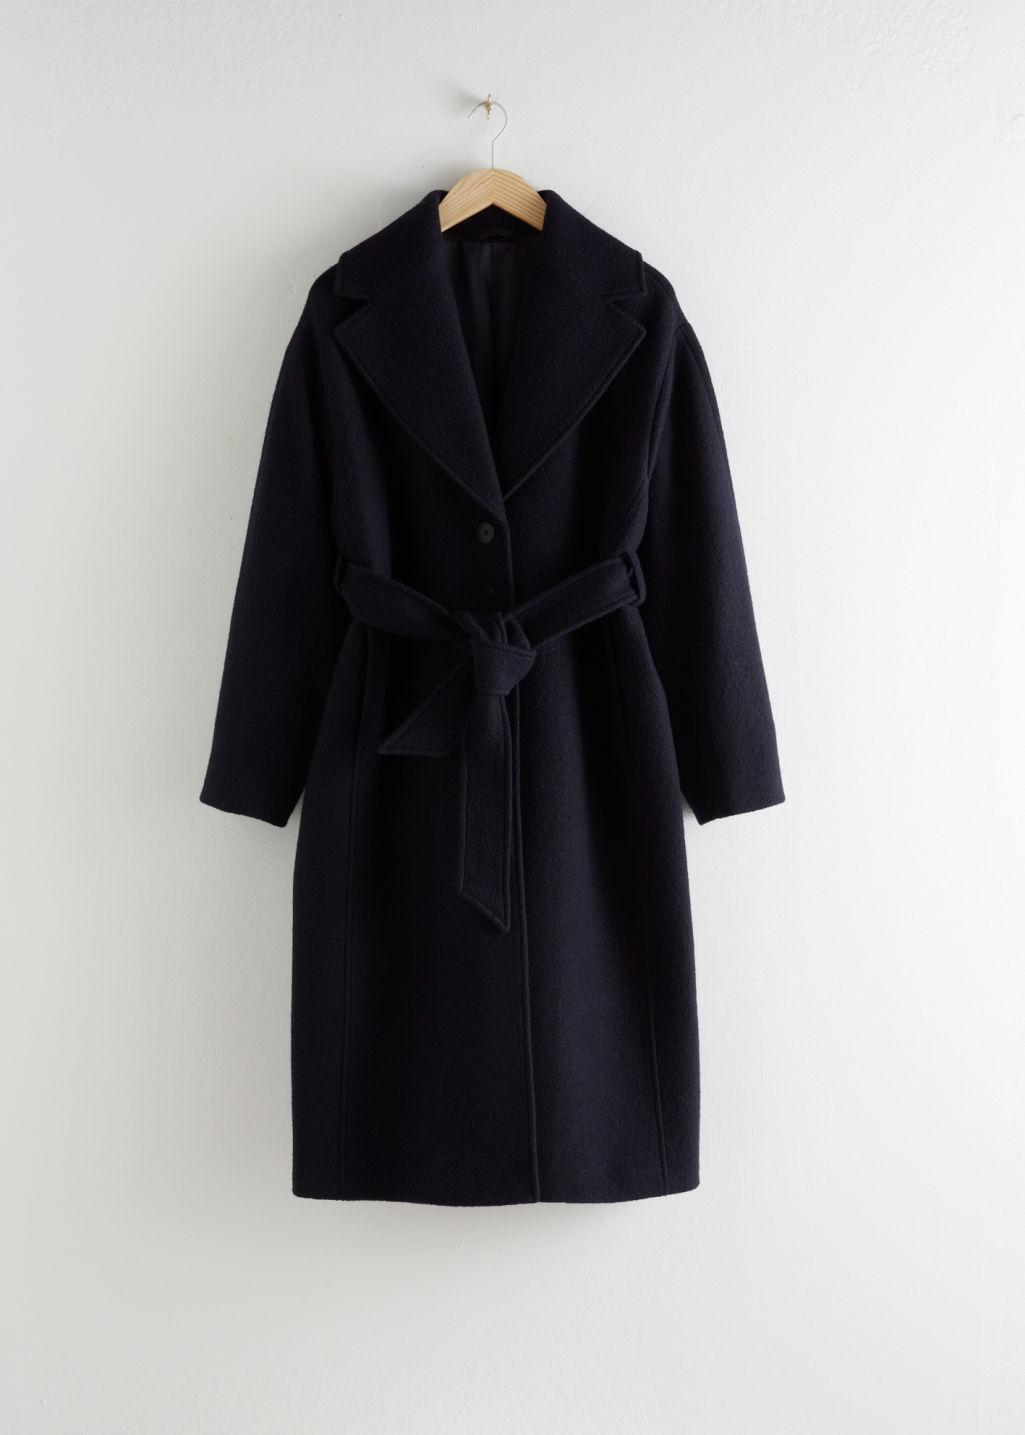 & Other Stories Oversized Belted Wool Coat in Blue - Lyst